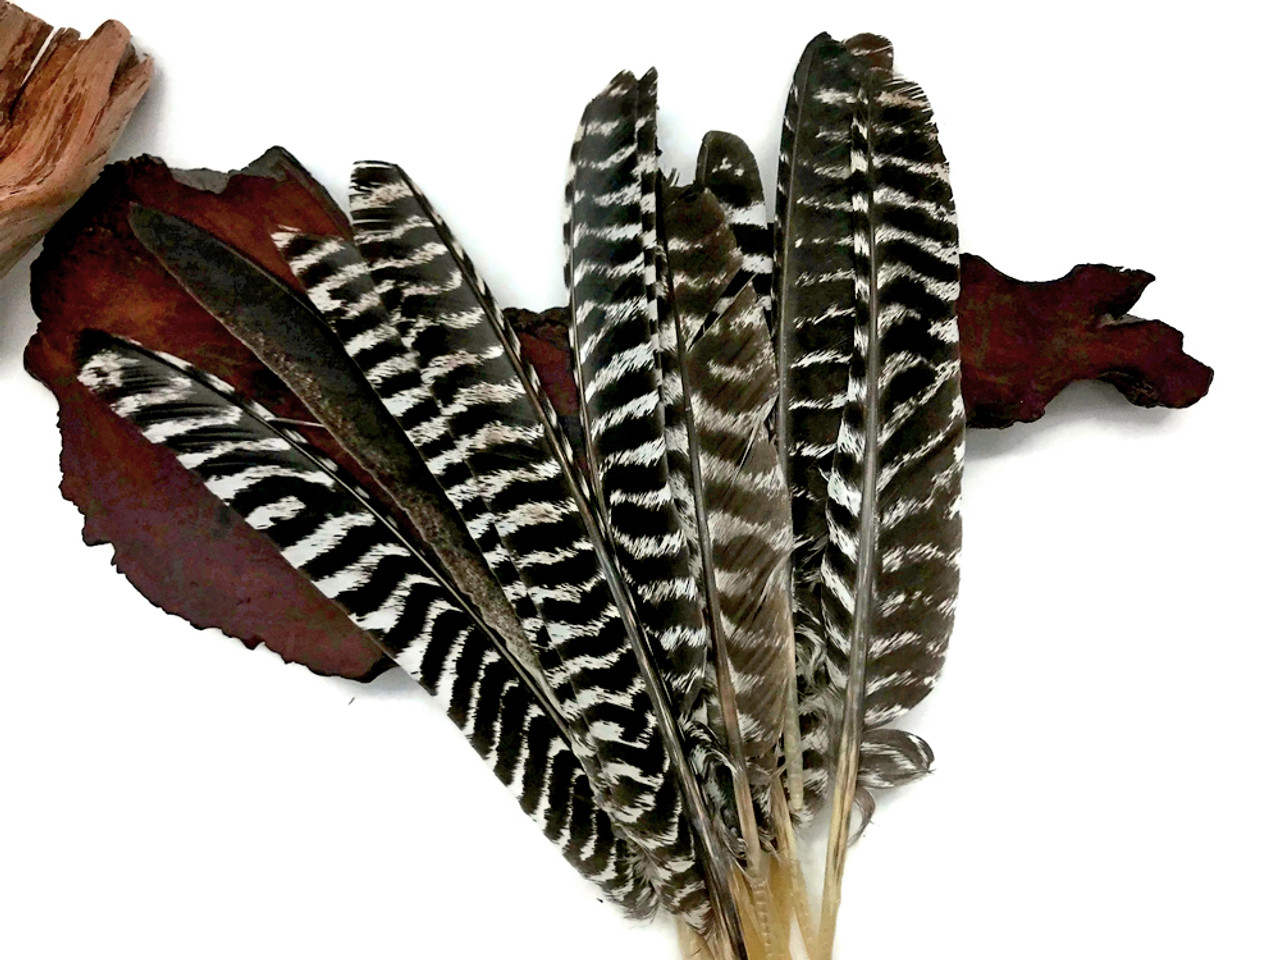  10pcs Wild Turkey Feathers Natural 10-12 inch Spotted